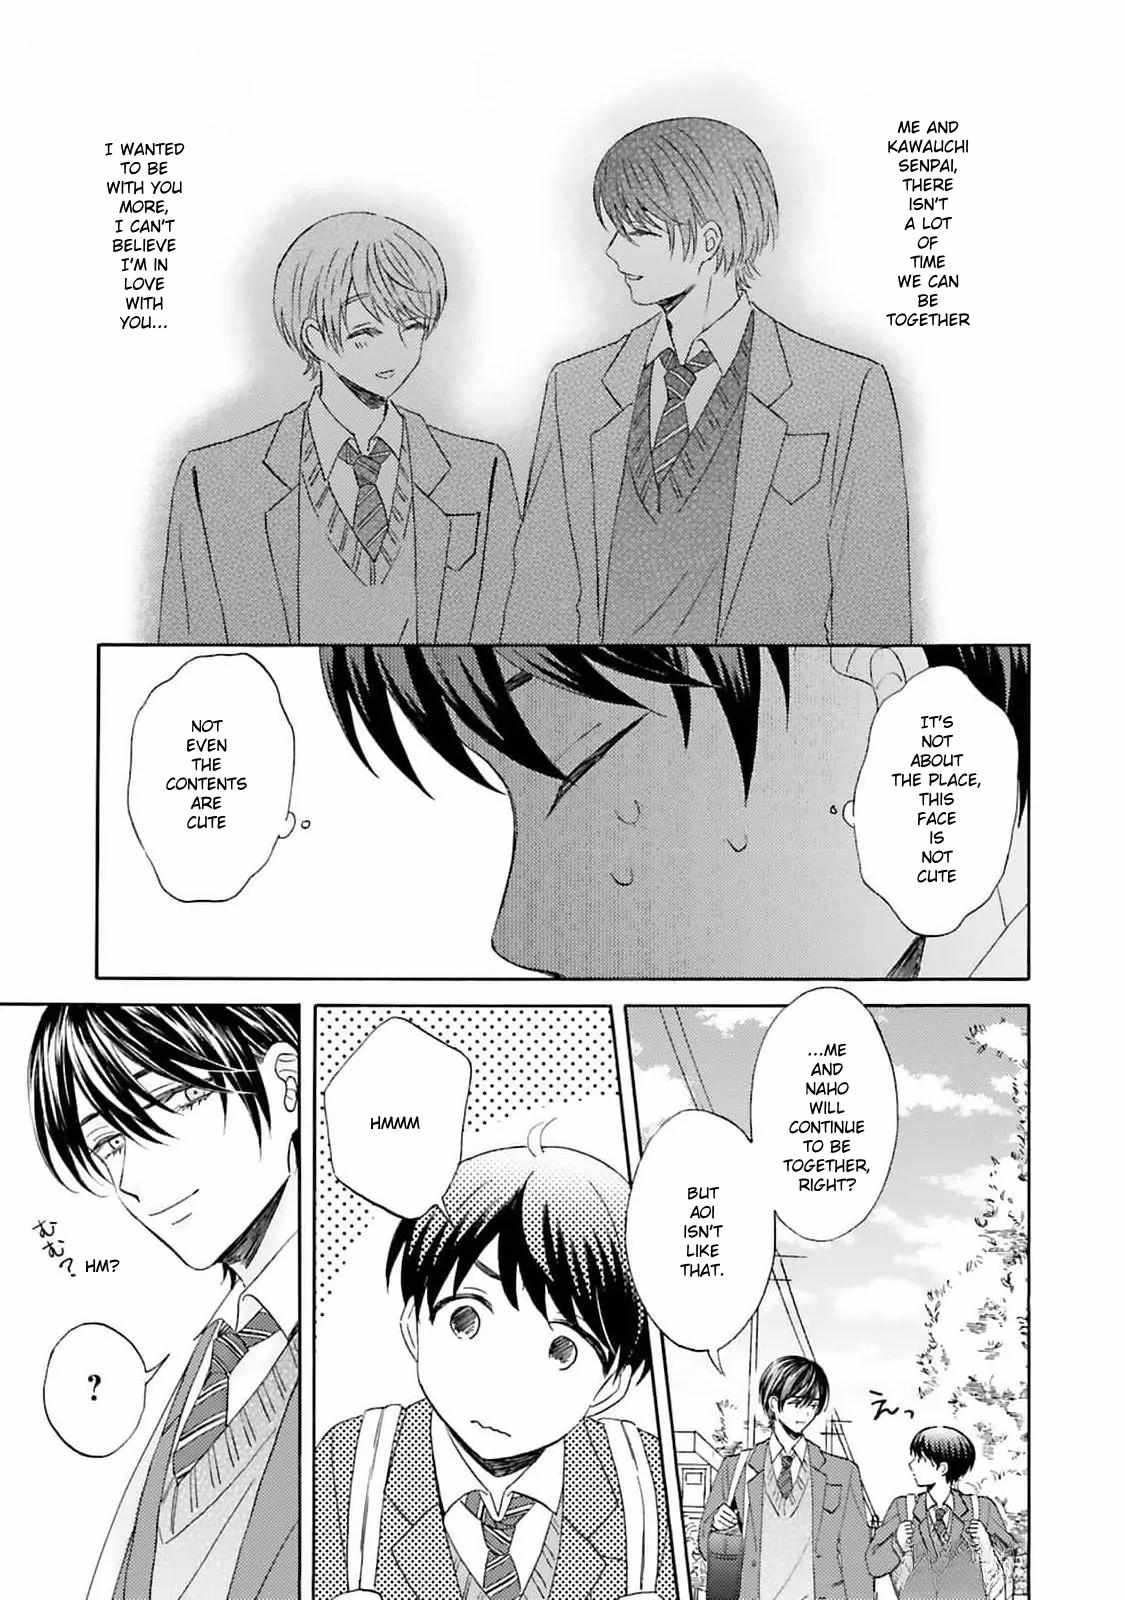 My Cutie Pie -An Ordinary Boy And His Gorgeous Childhood Friend- 〘Official〙 - 5 page 15-3523cfeb